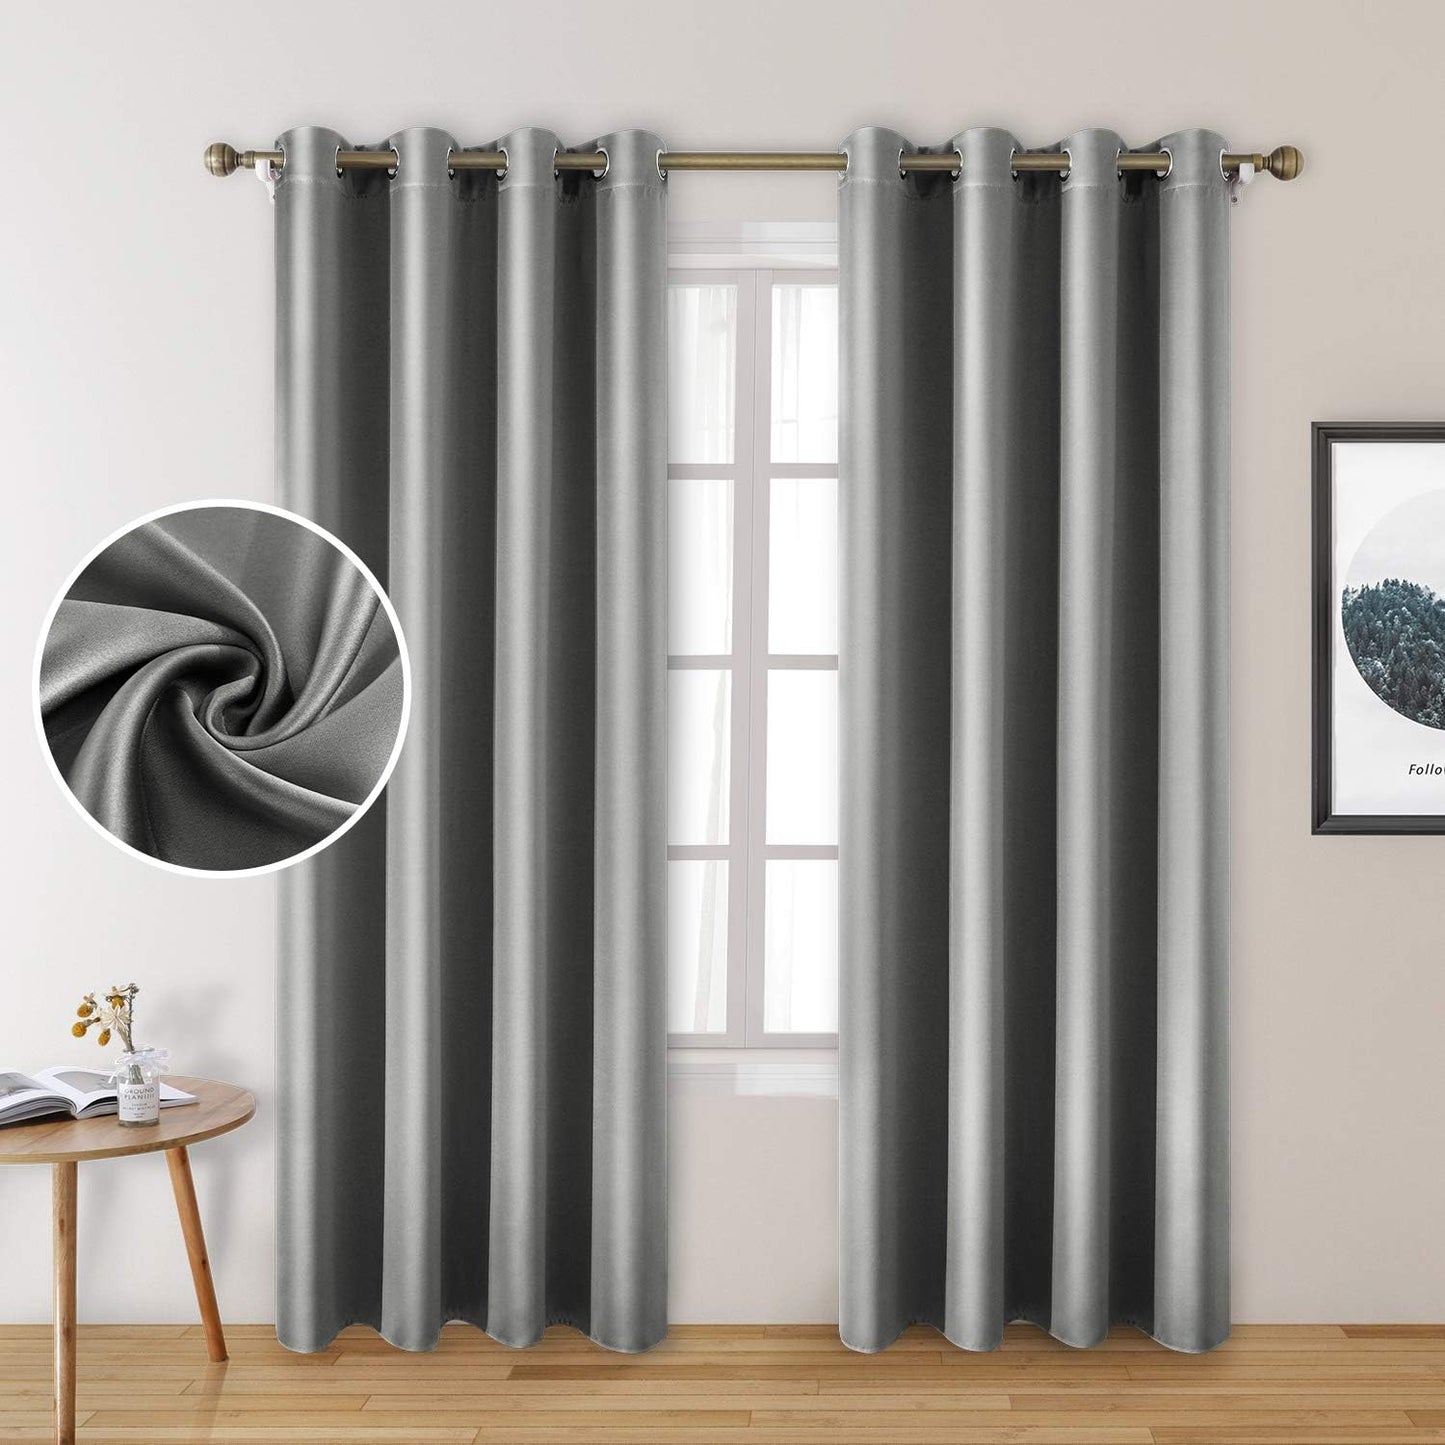 HOMEIDEAS Gold Blackout Curtains, Faux Silk for Bedroom 52 X 84 Inch Room Darkening Satin Thermal Insulated Drapes for Window, Indoor, Living Room, 2 Panels  HOMEIDEAS Silver Grey 52" X 84" 